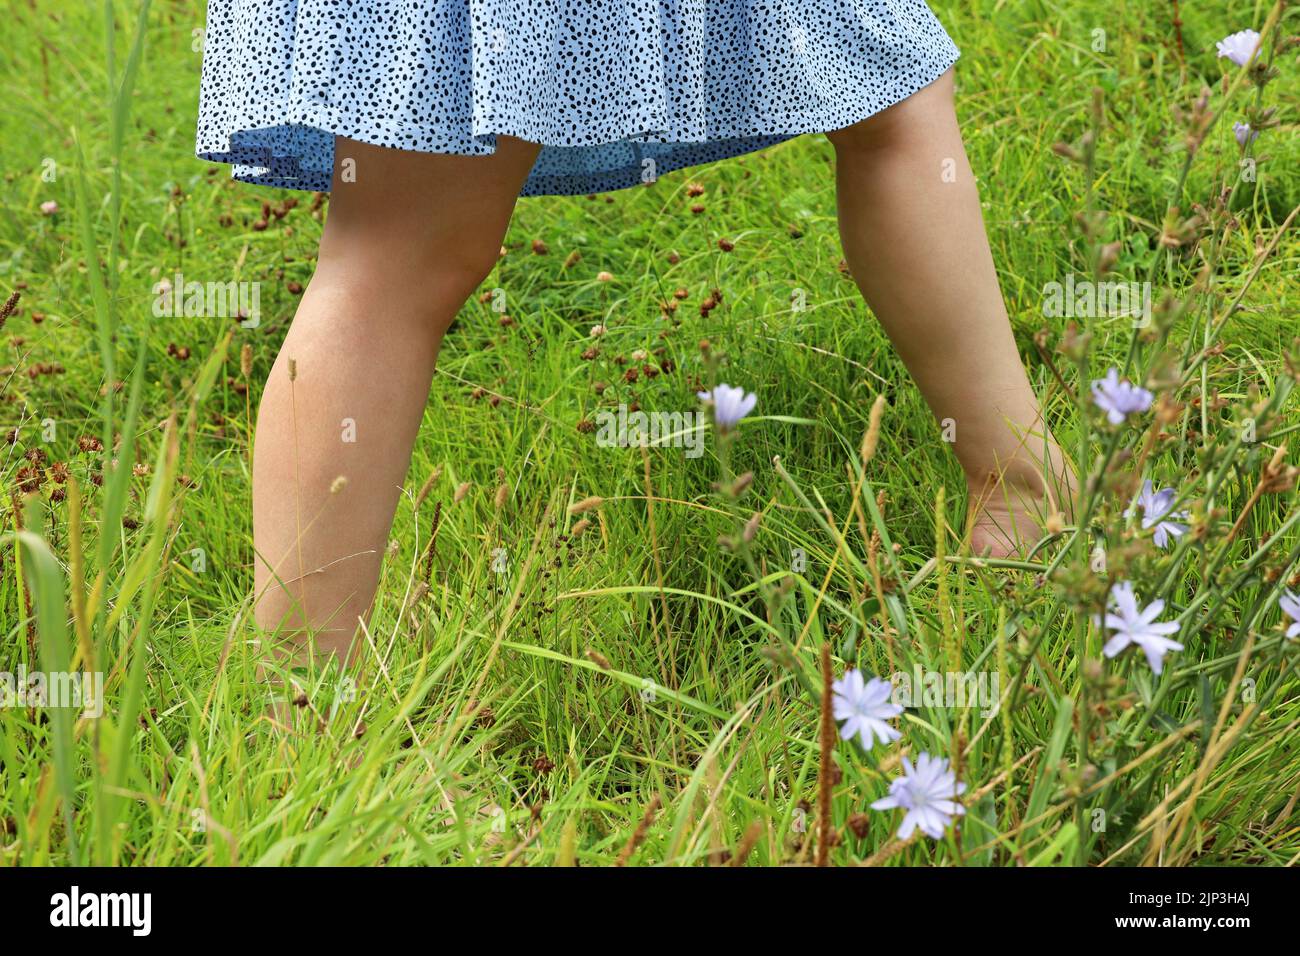 Barefoot girl in summer dress walking on a grass. Young woman enjoying the nature on green meadow with chicory flowers Stock Photo